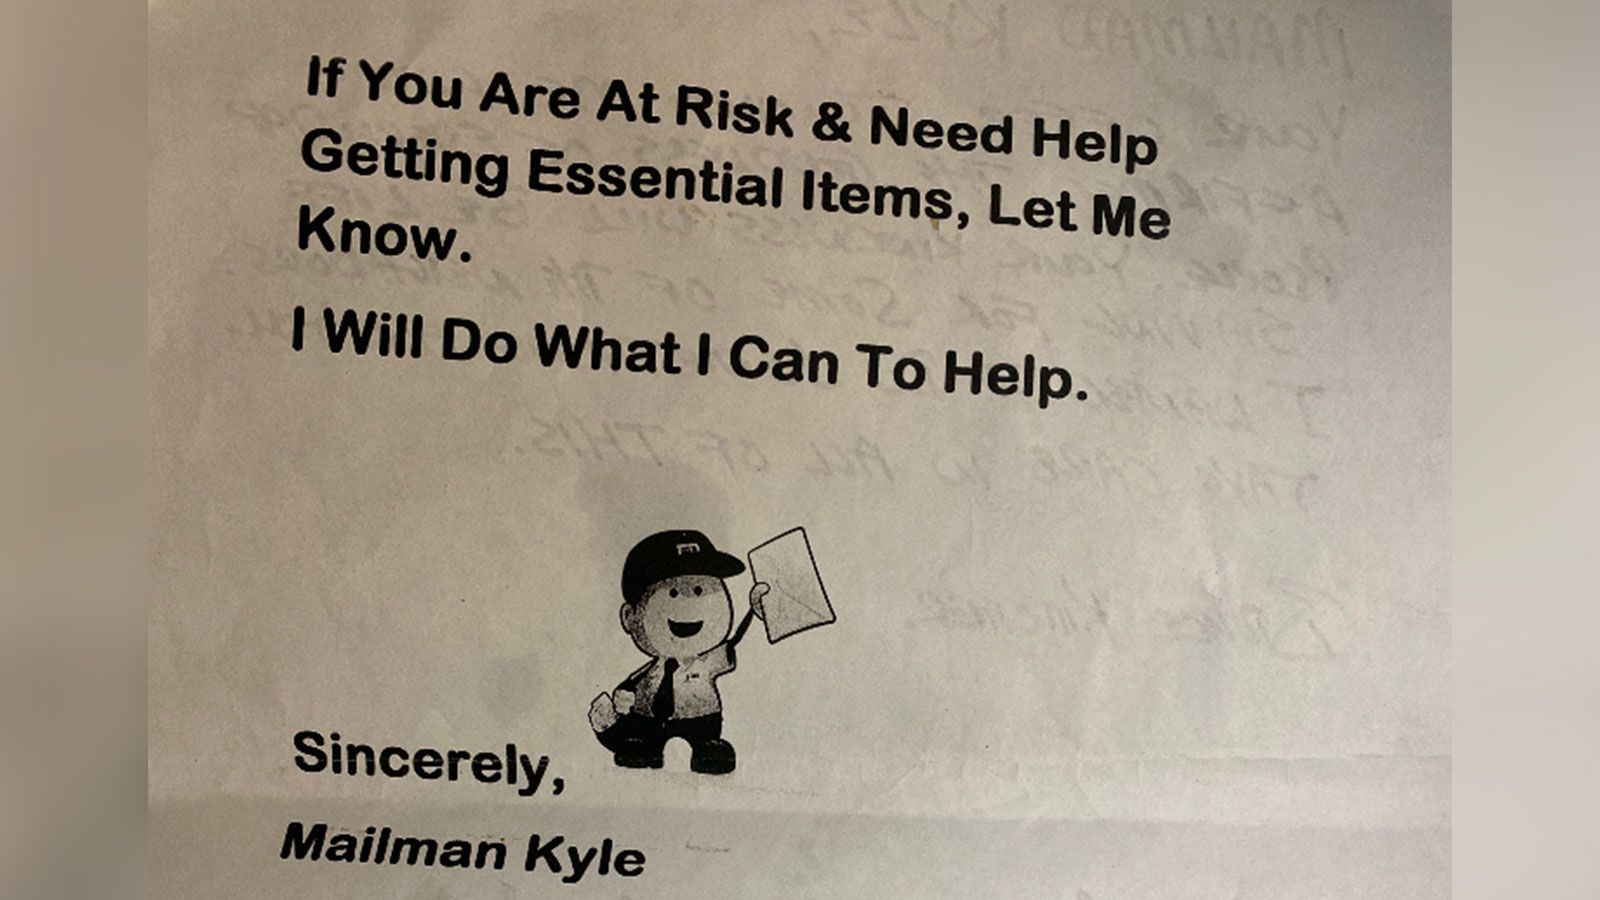 Kyle West made notes to bring to his customers to facilitate supply requests. 